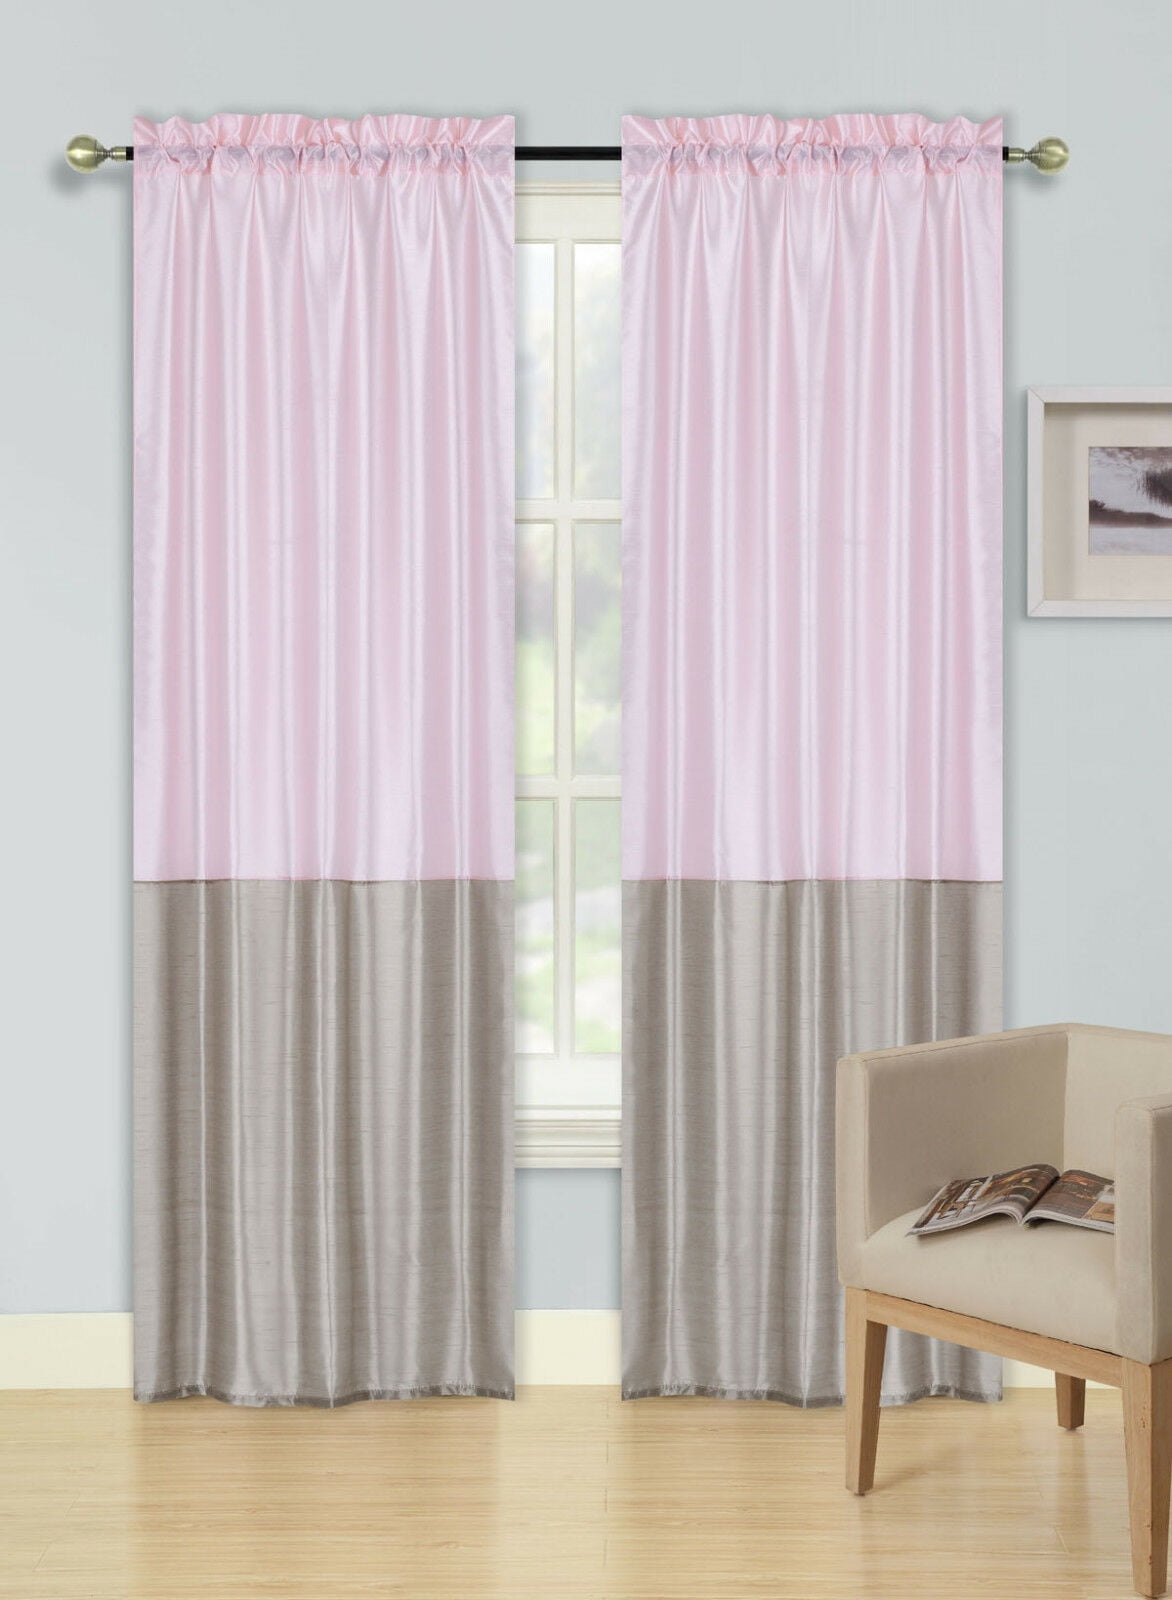 2PC ANY CURTAINS WINDOW  2TONE COLORS SEE THROUGH PANEL FAUX SILK ROD POCKET NEW 